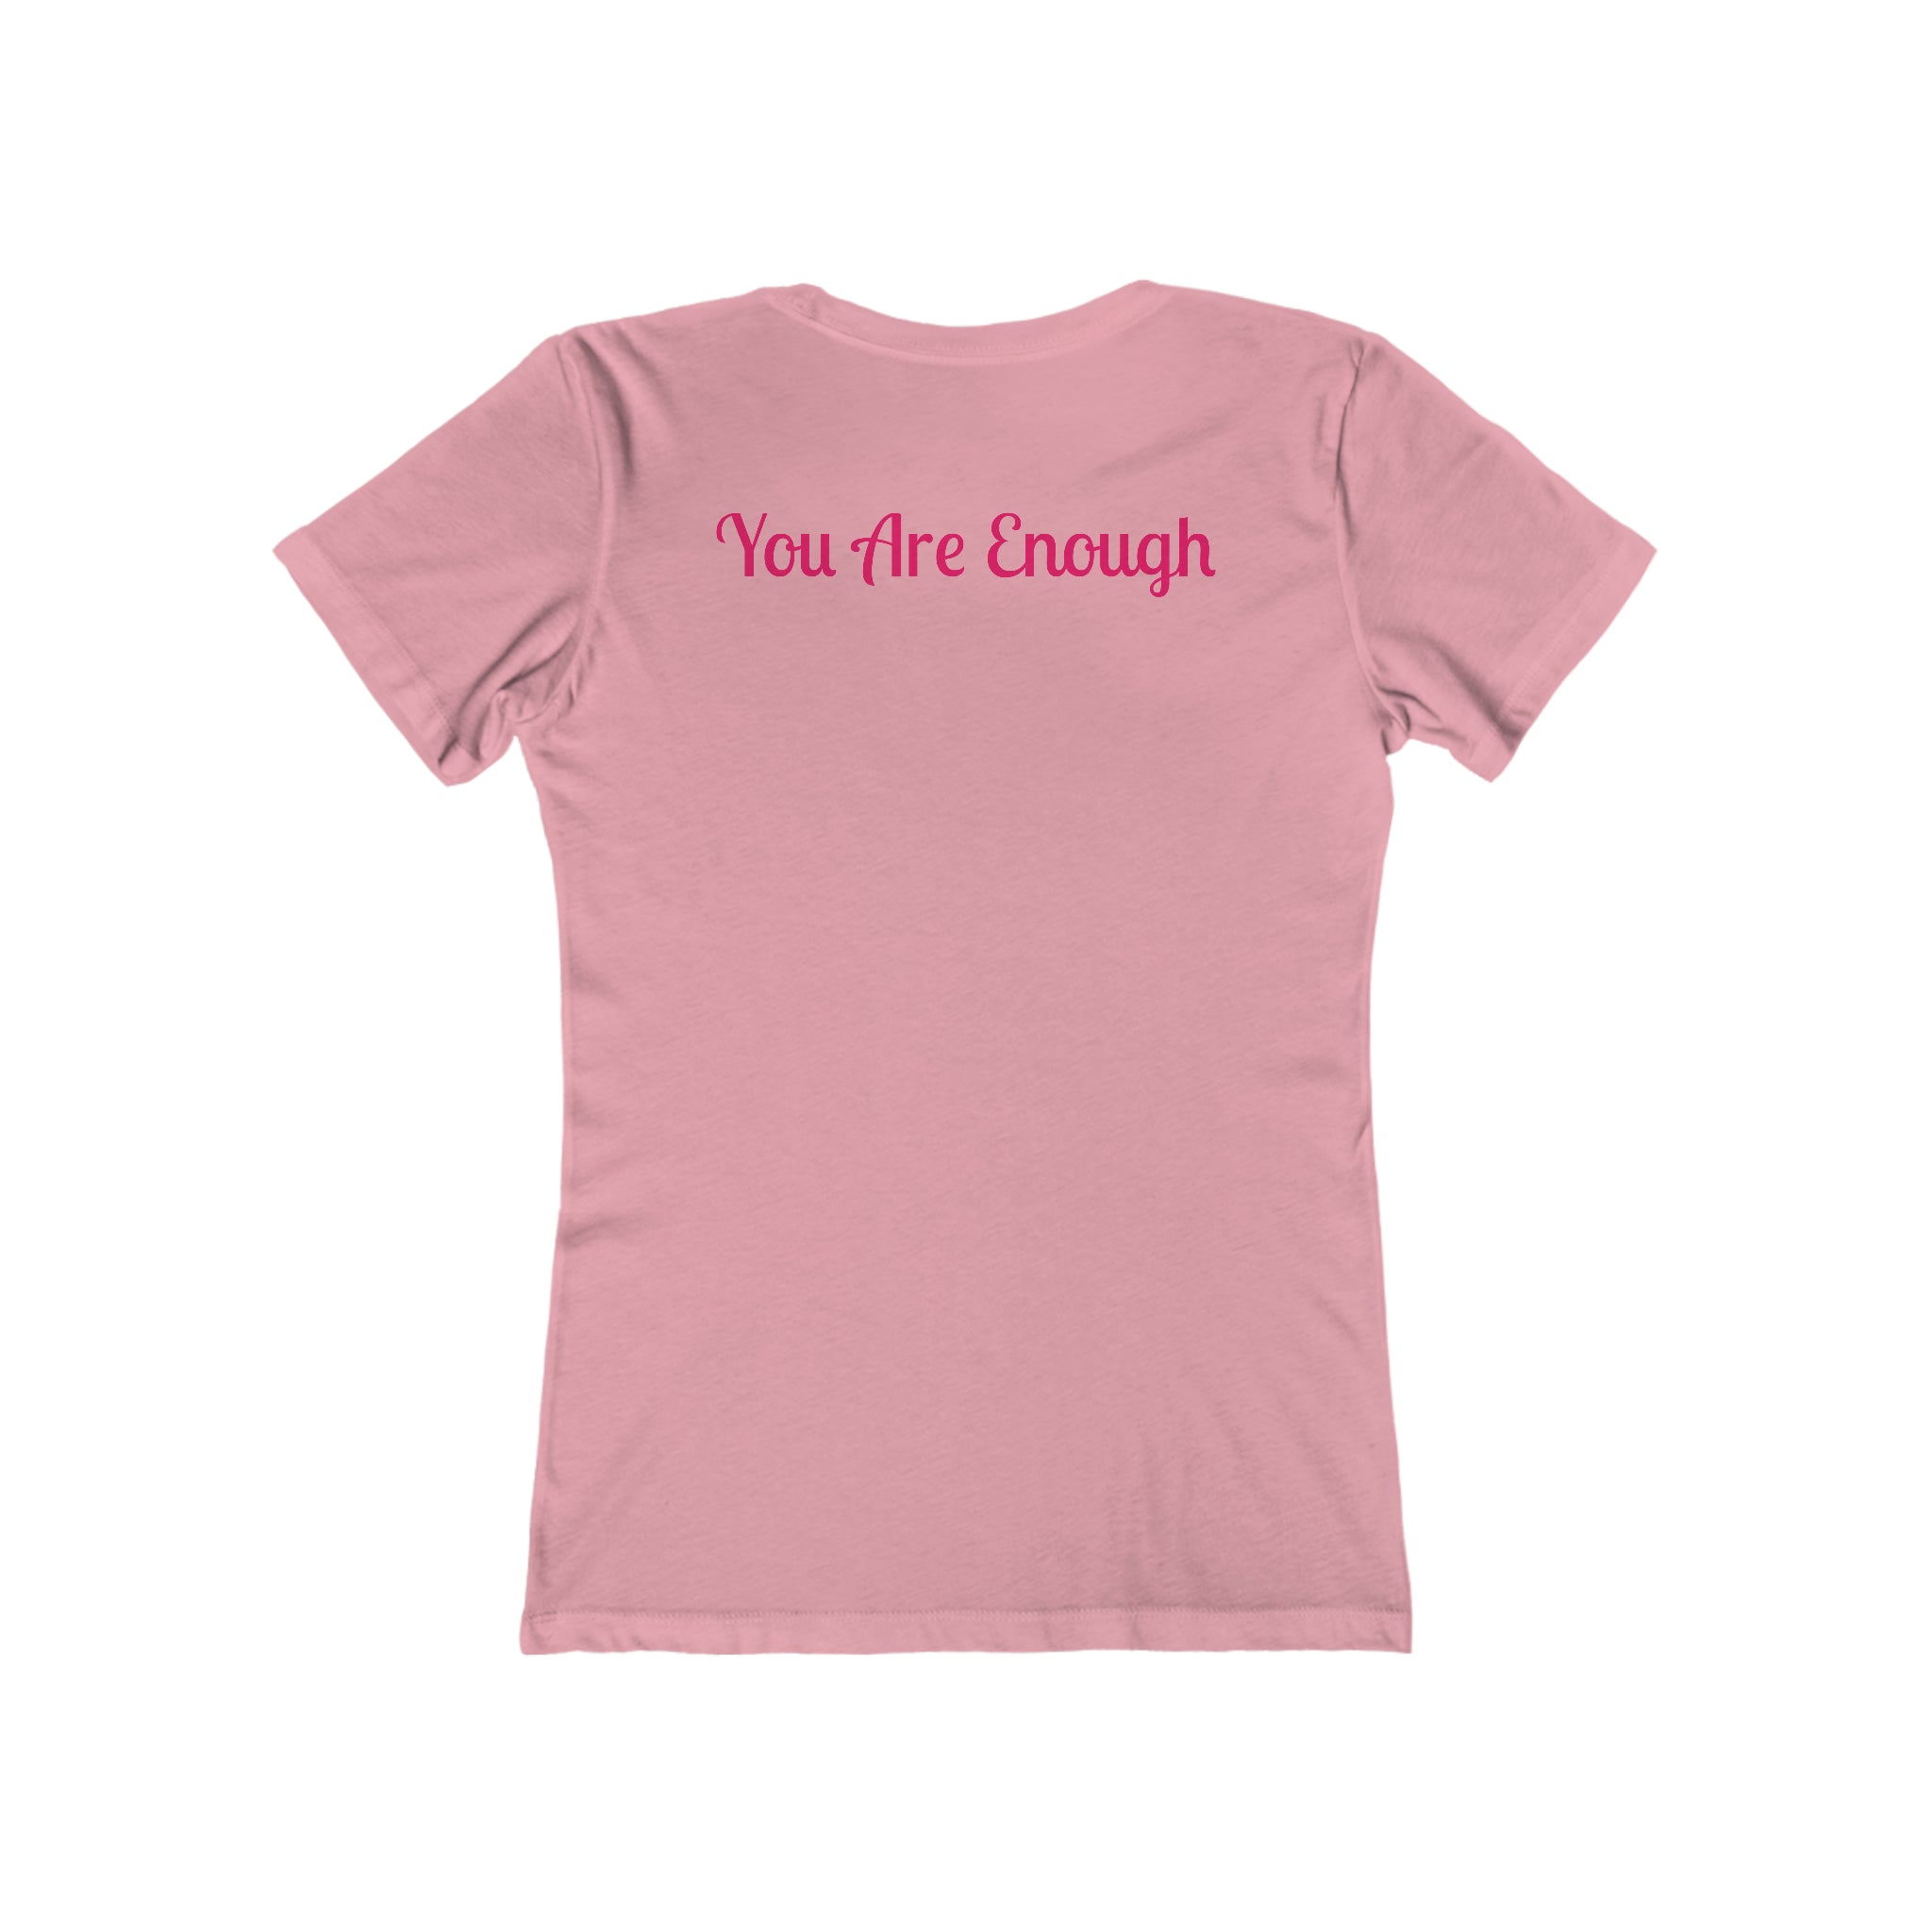 You Are Enough Boyfriend Tee: Affirm Your Worth Solid Light Pink Awareness Break the Stigma Mental Health Support Pledge Donation slim fit shirt Tee women shirt T-Shirt 12718630596078754632_2048_7746f379-6a7a-439e-9a76-0ac6fc652616 Printify